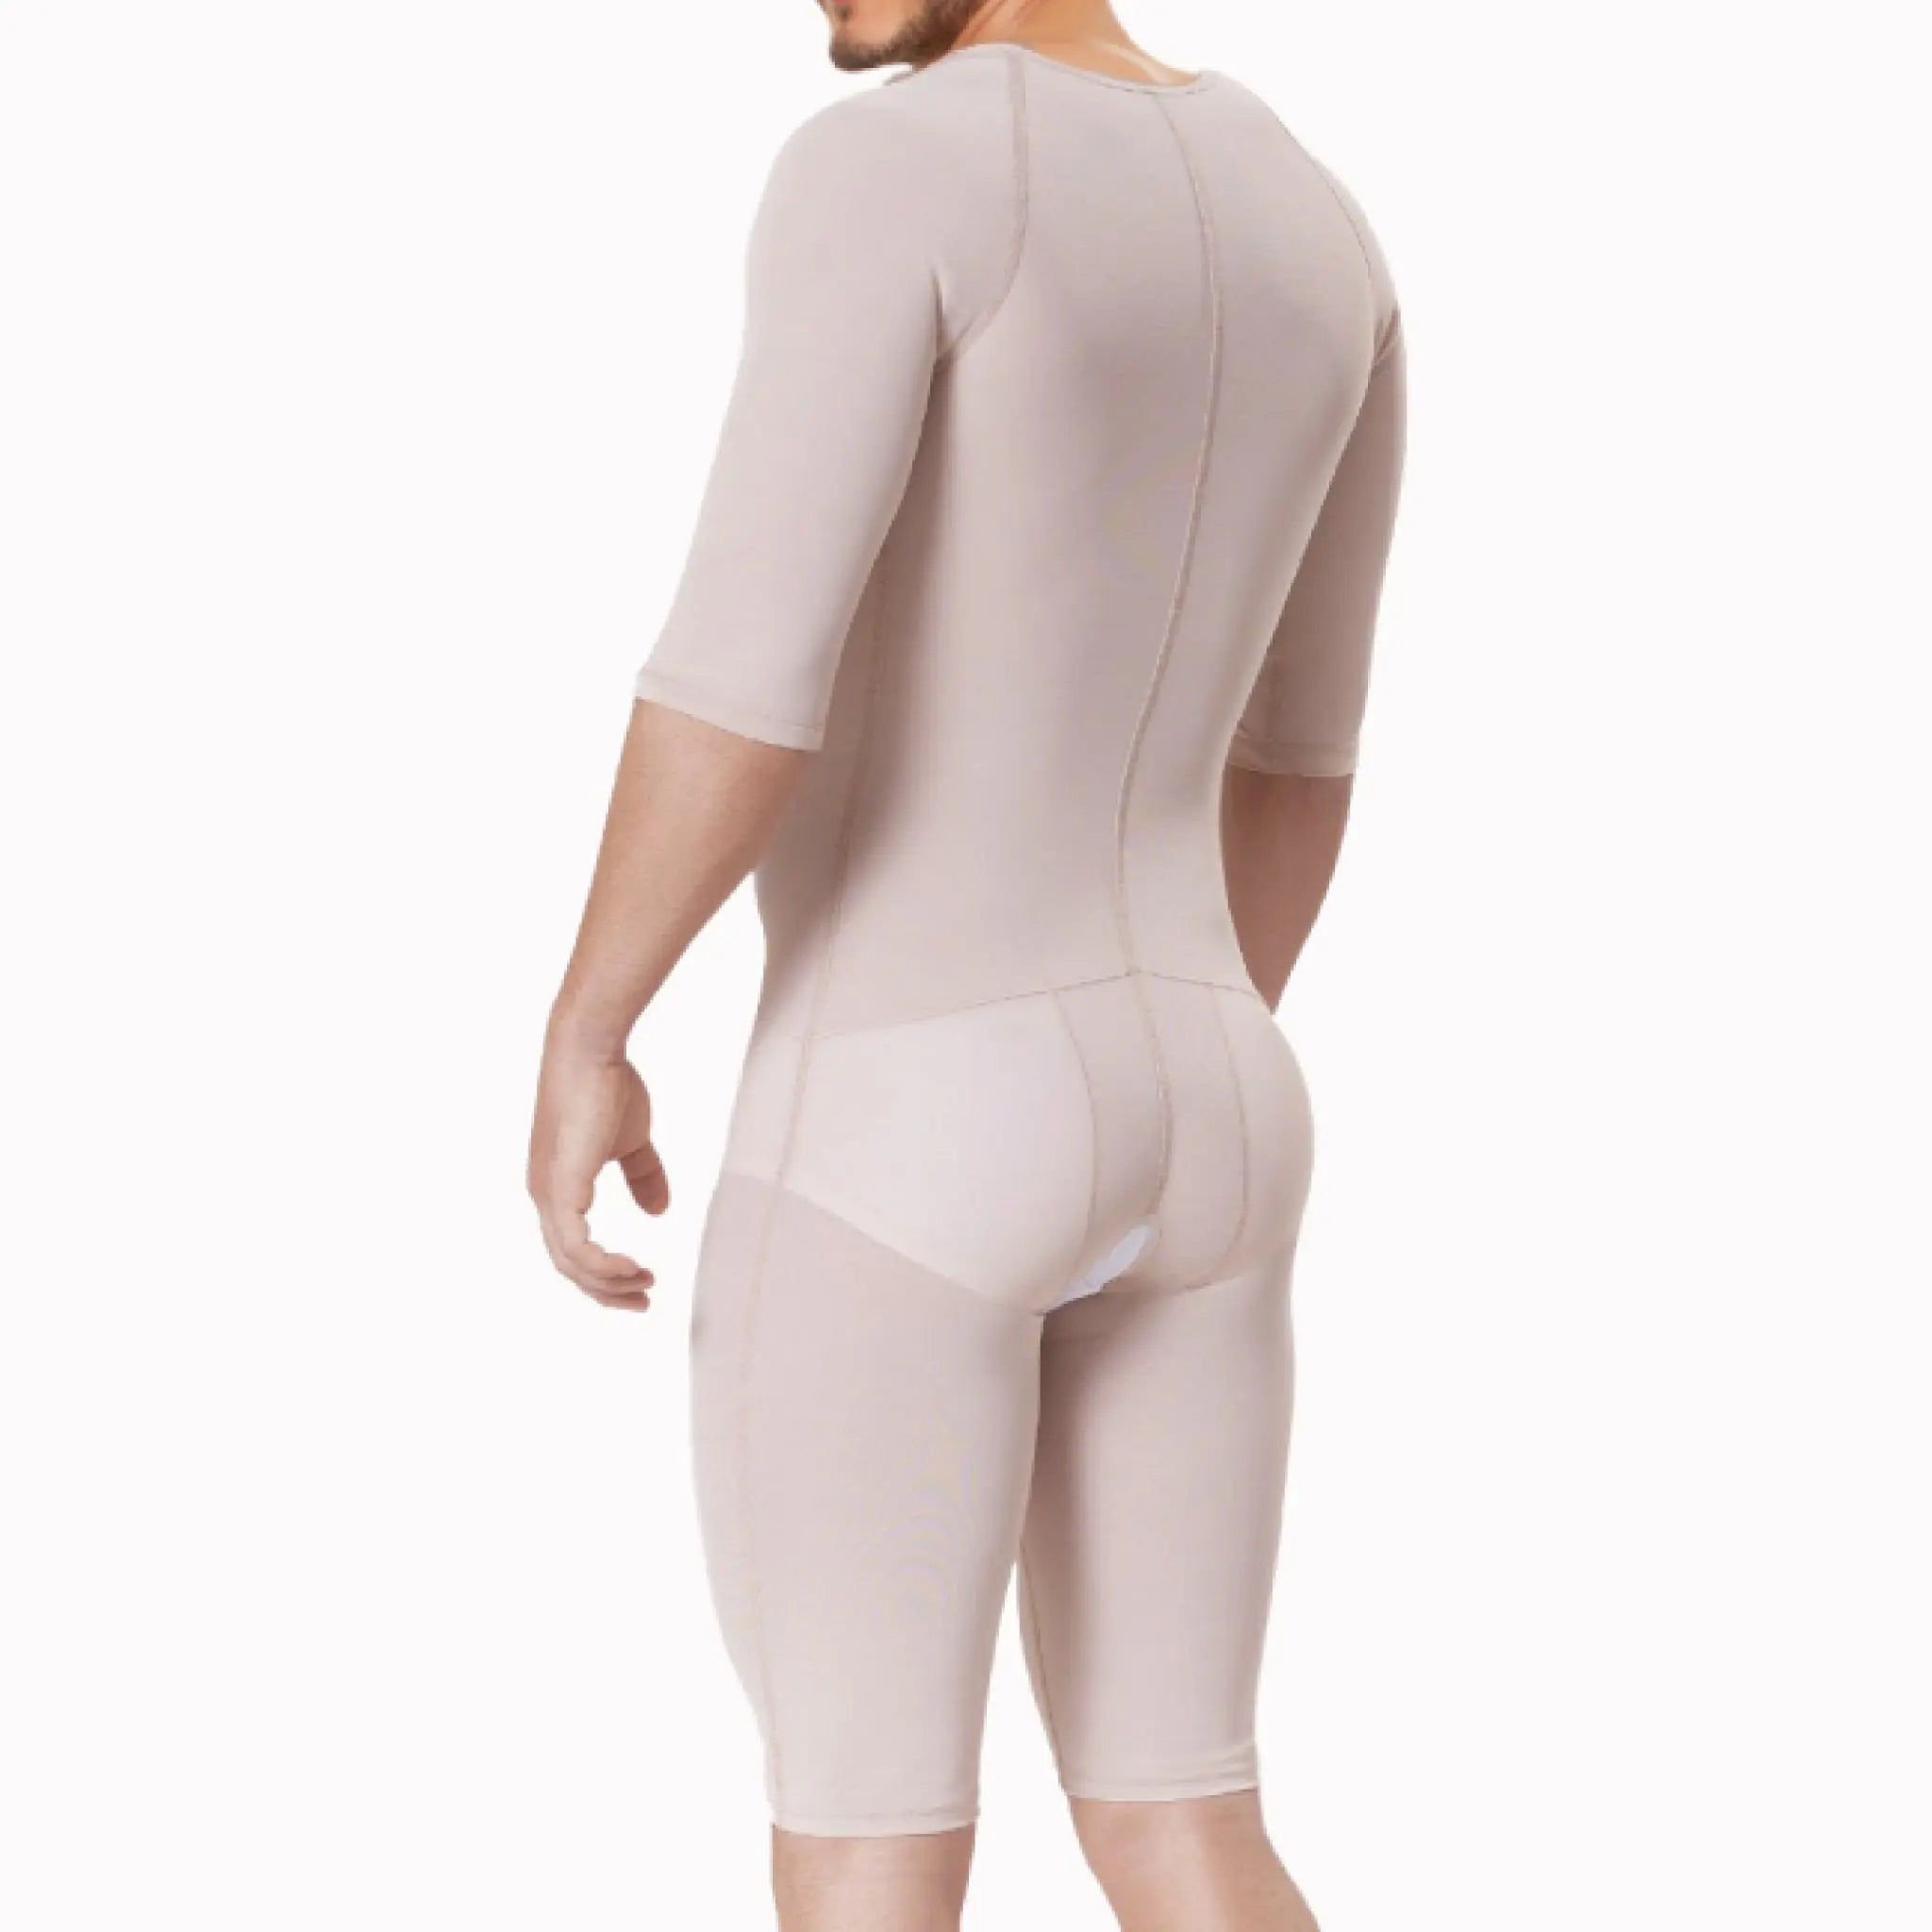 Mens Body Shapers, Spanx for Men